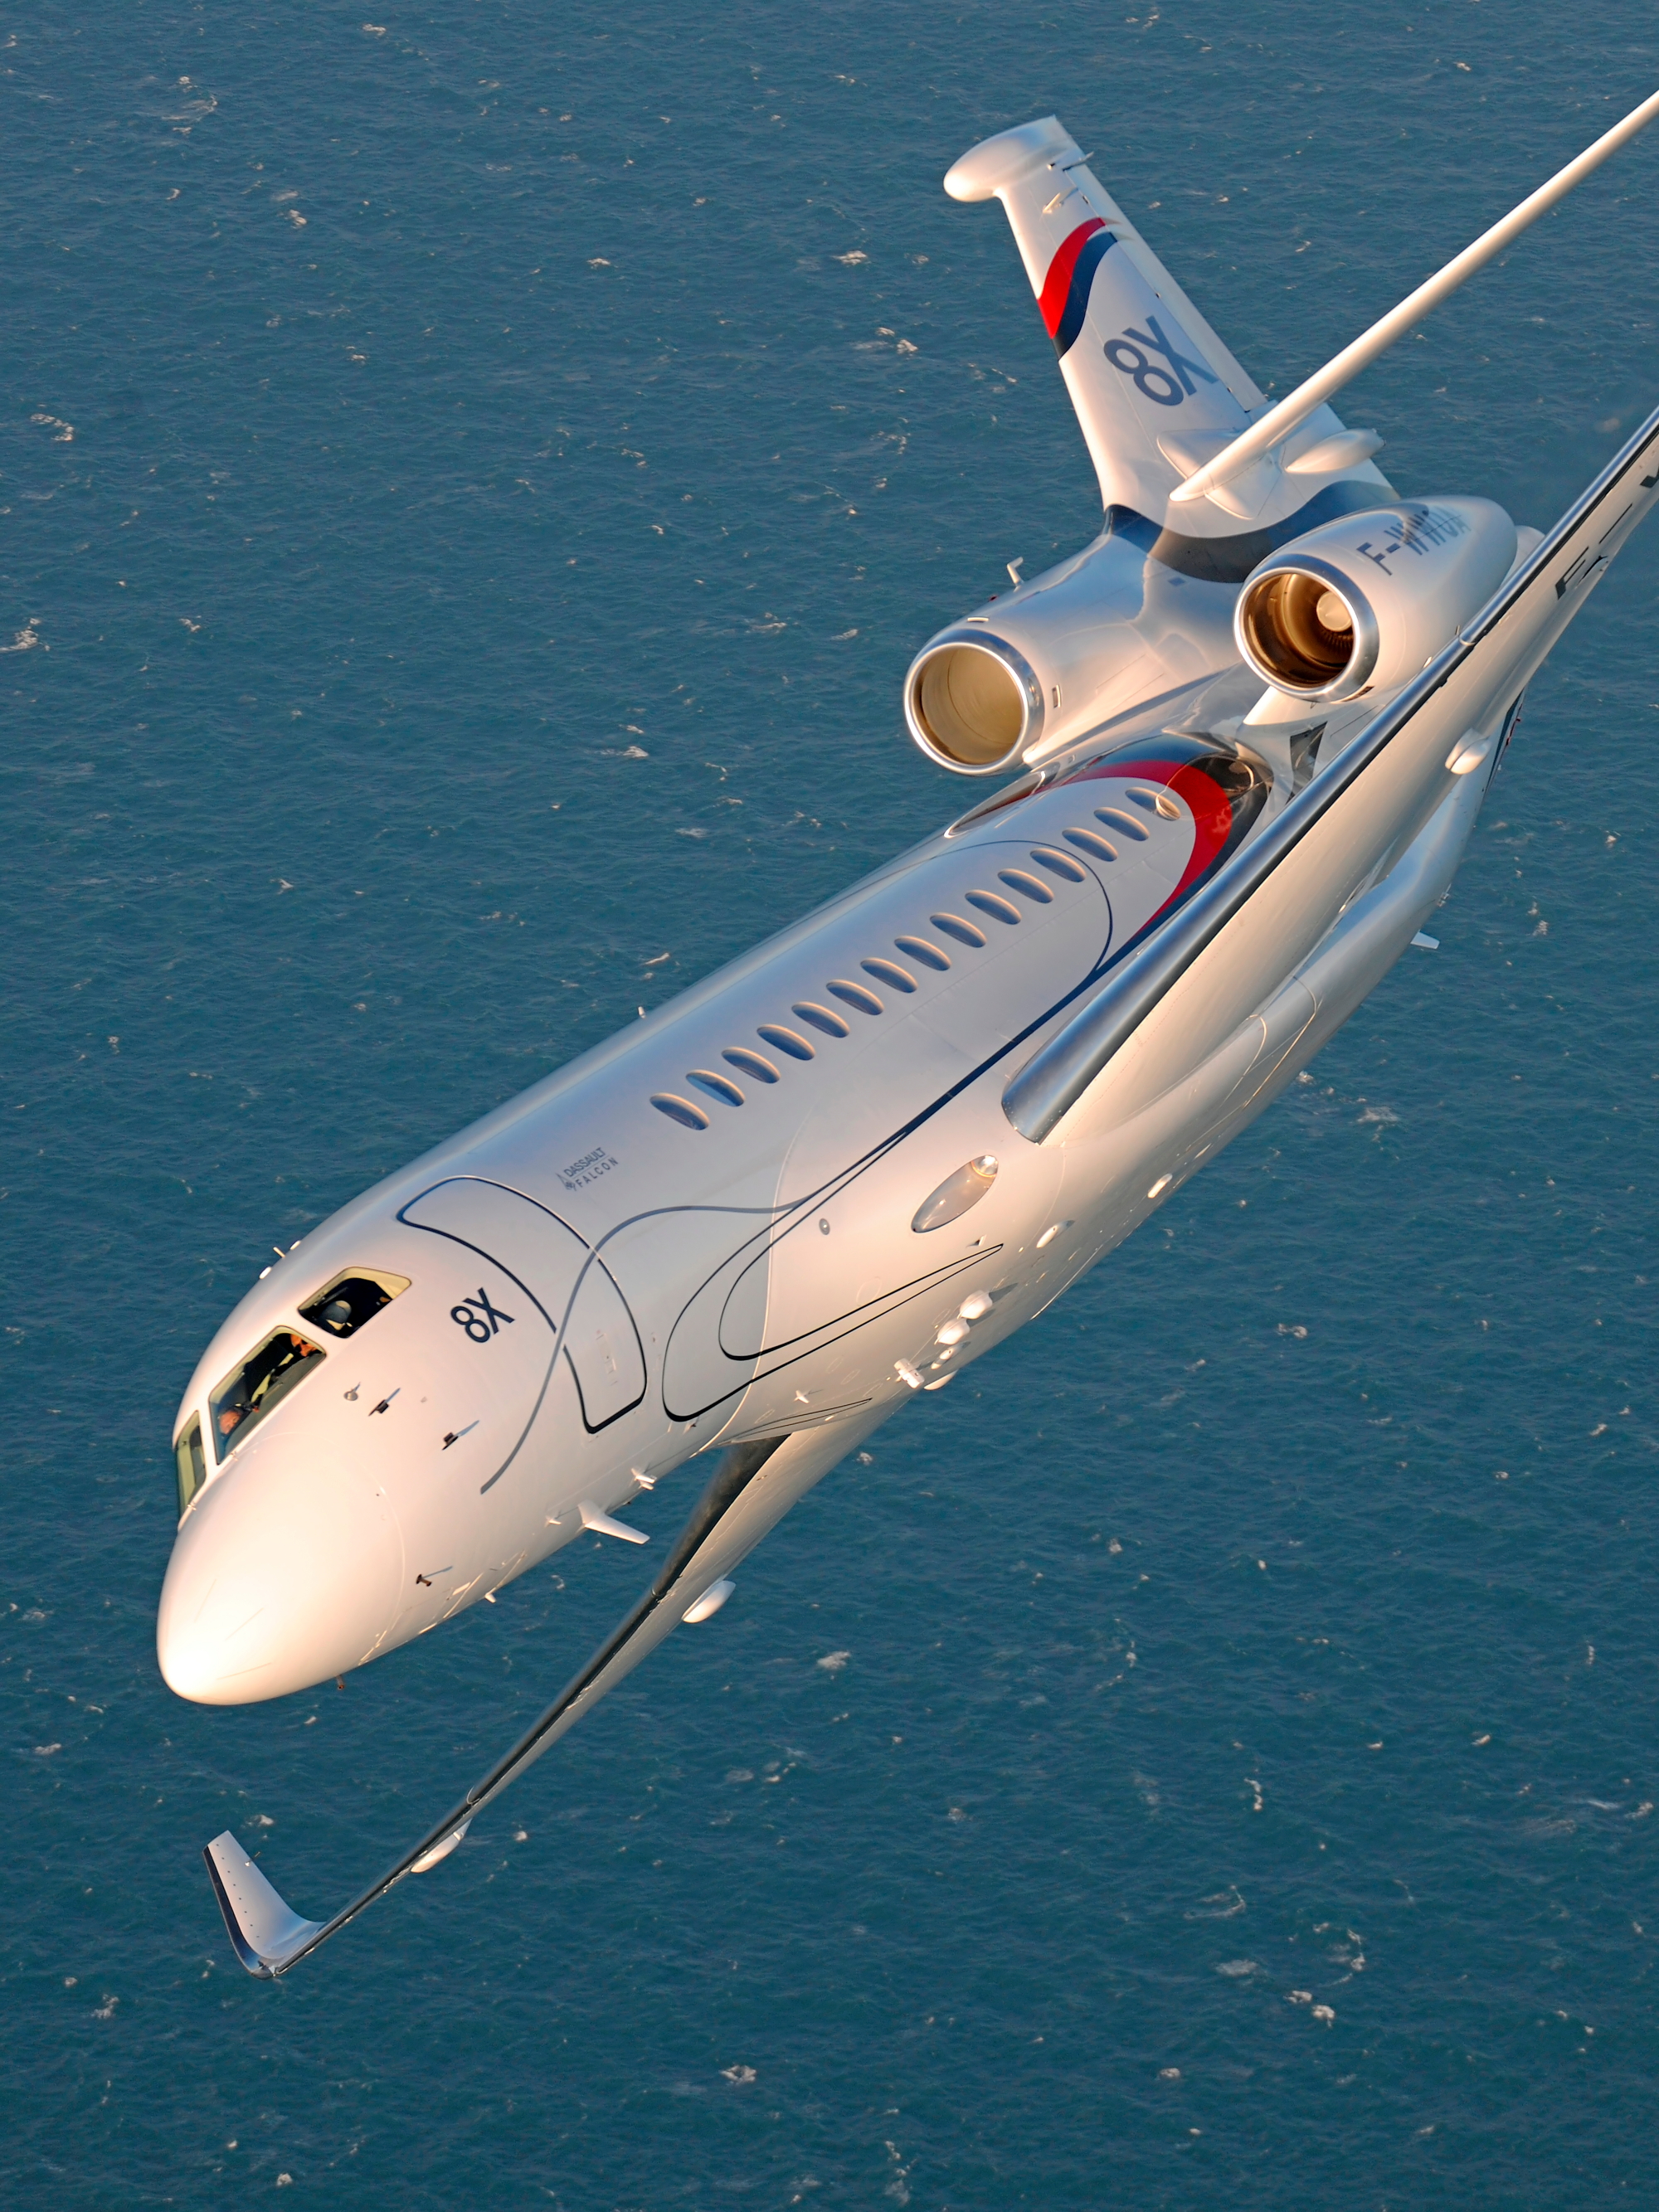 Dassault Falcon 8X. Click to enlarge.